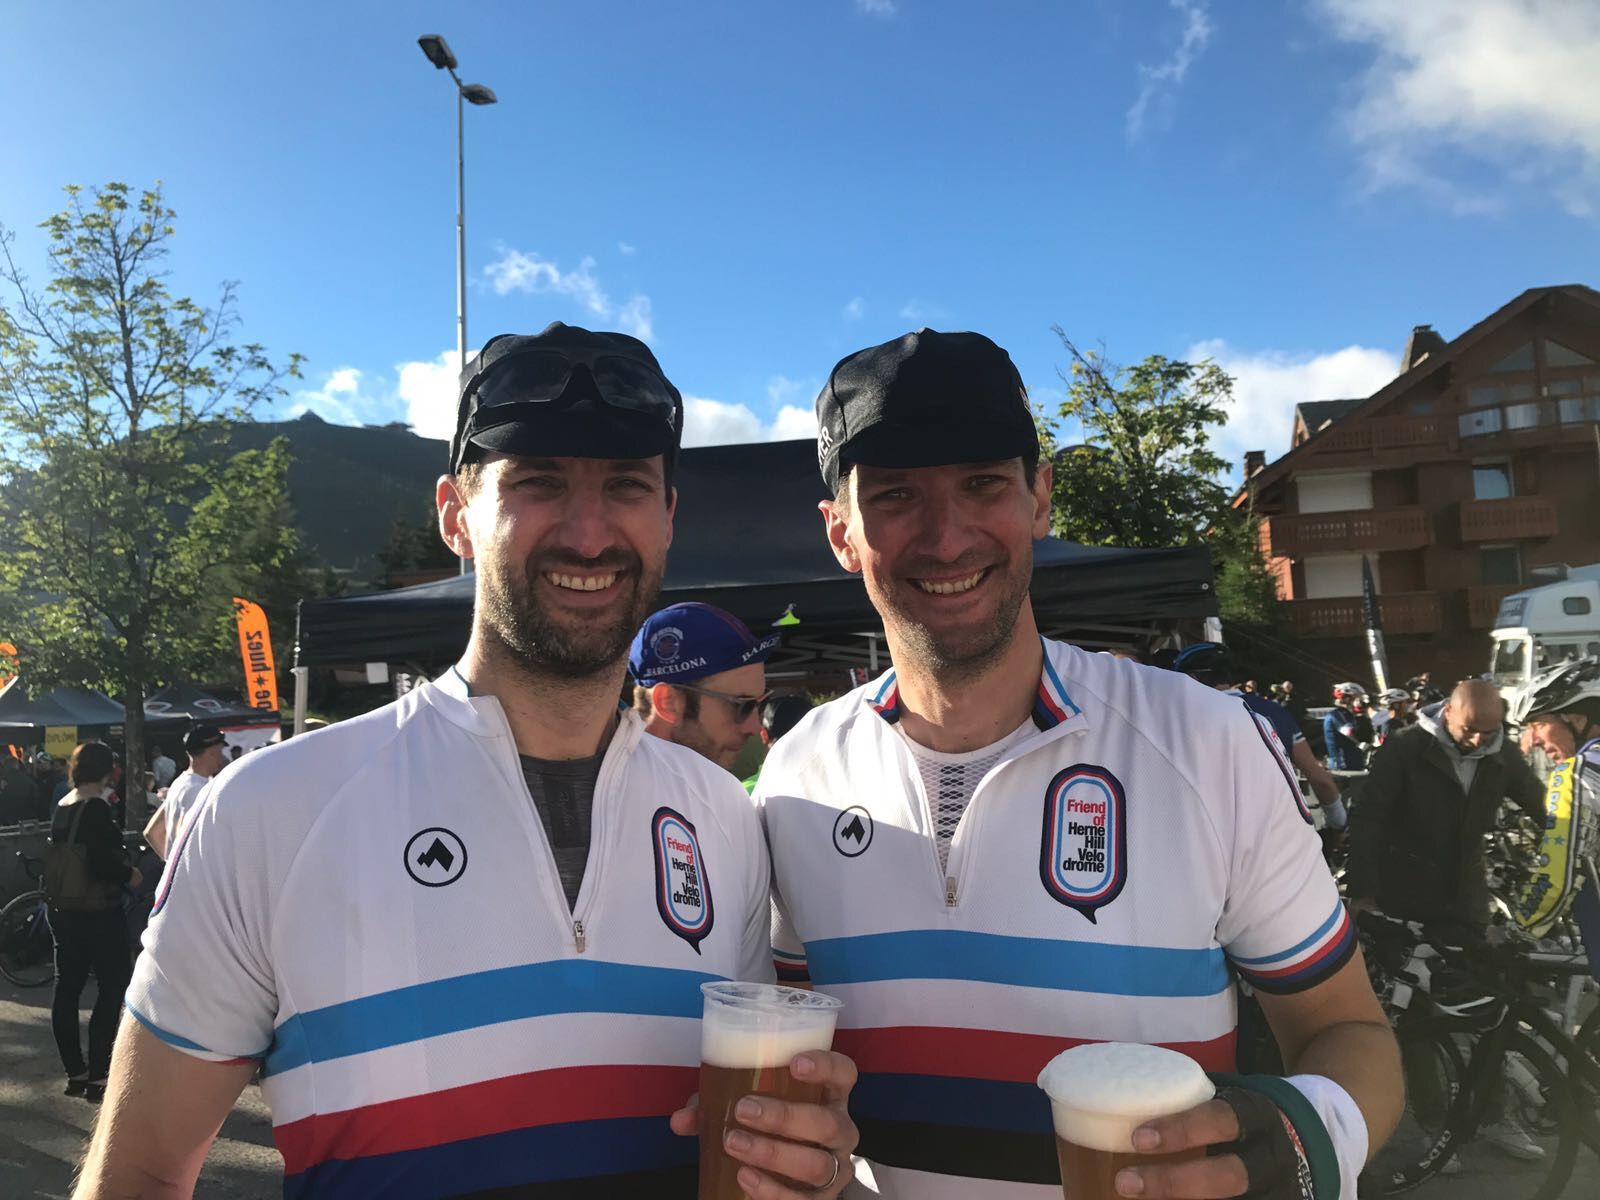 Steve and Andy at La Marmotte with beers in hand